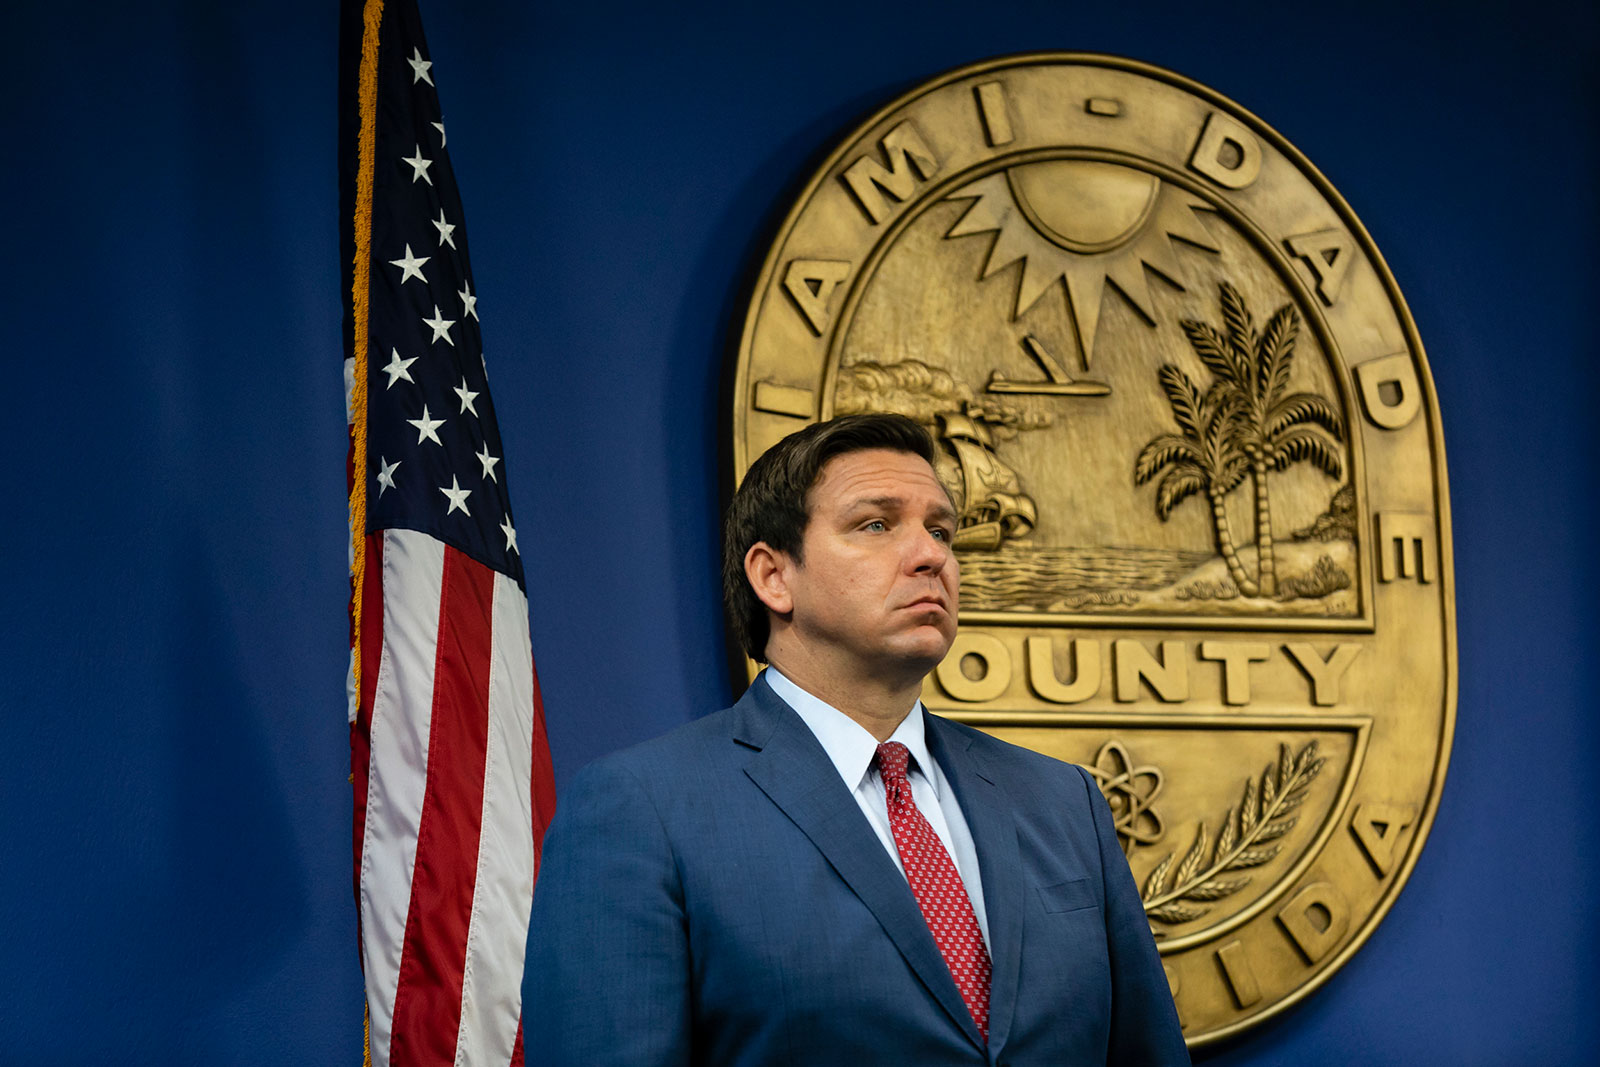 Florida Governor Ron DeSantis looks on during a press conference on June 8 in Miami, Florida.